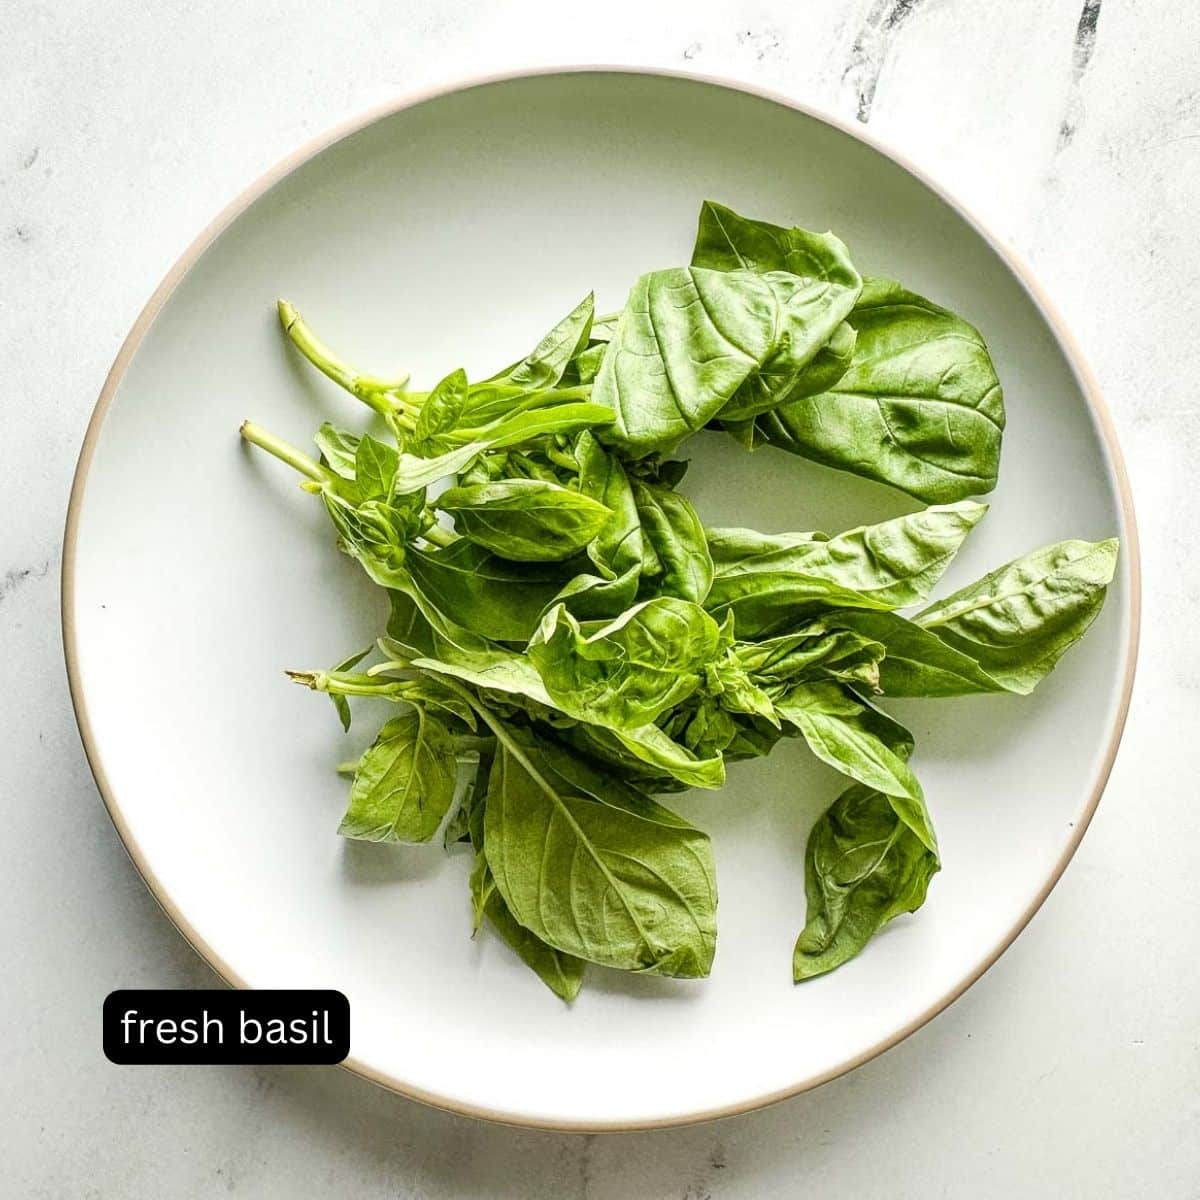 Labeled fresh basil on a white plate.